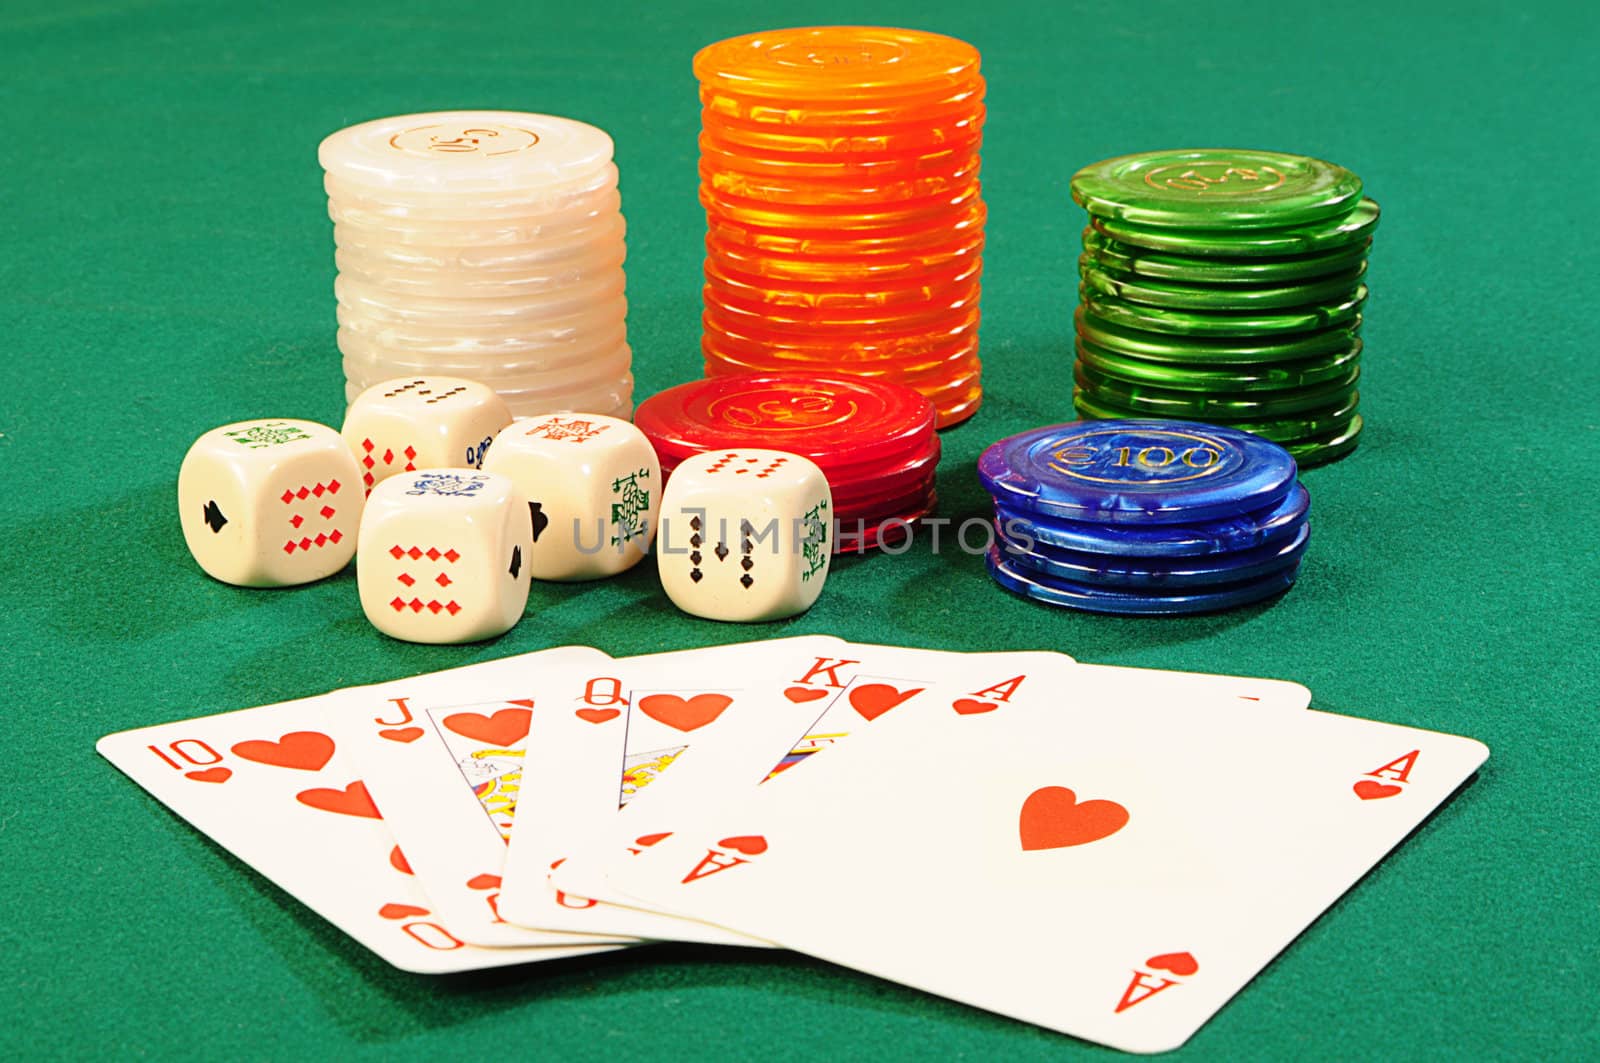 Casino chips,playing bones and royal flash combination on green felt